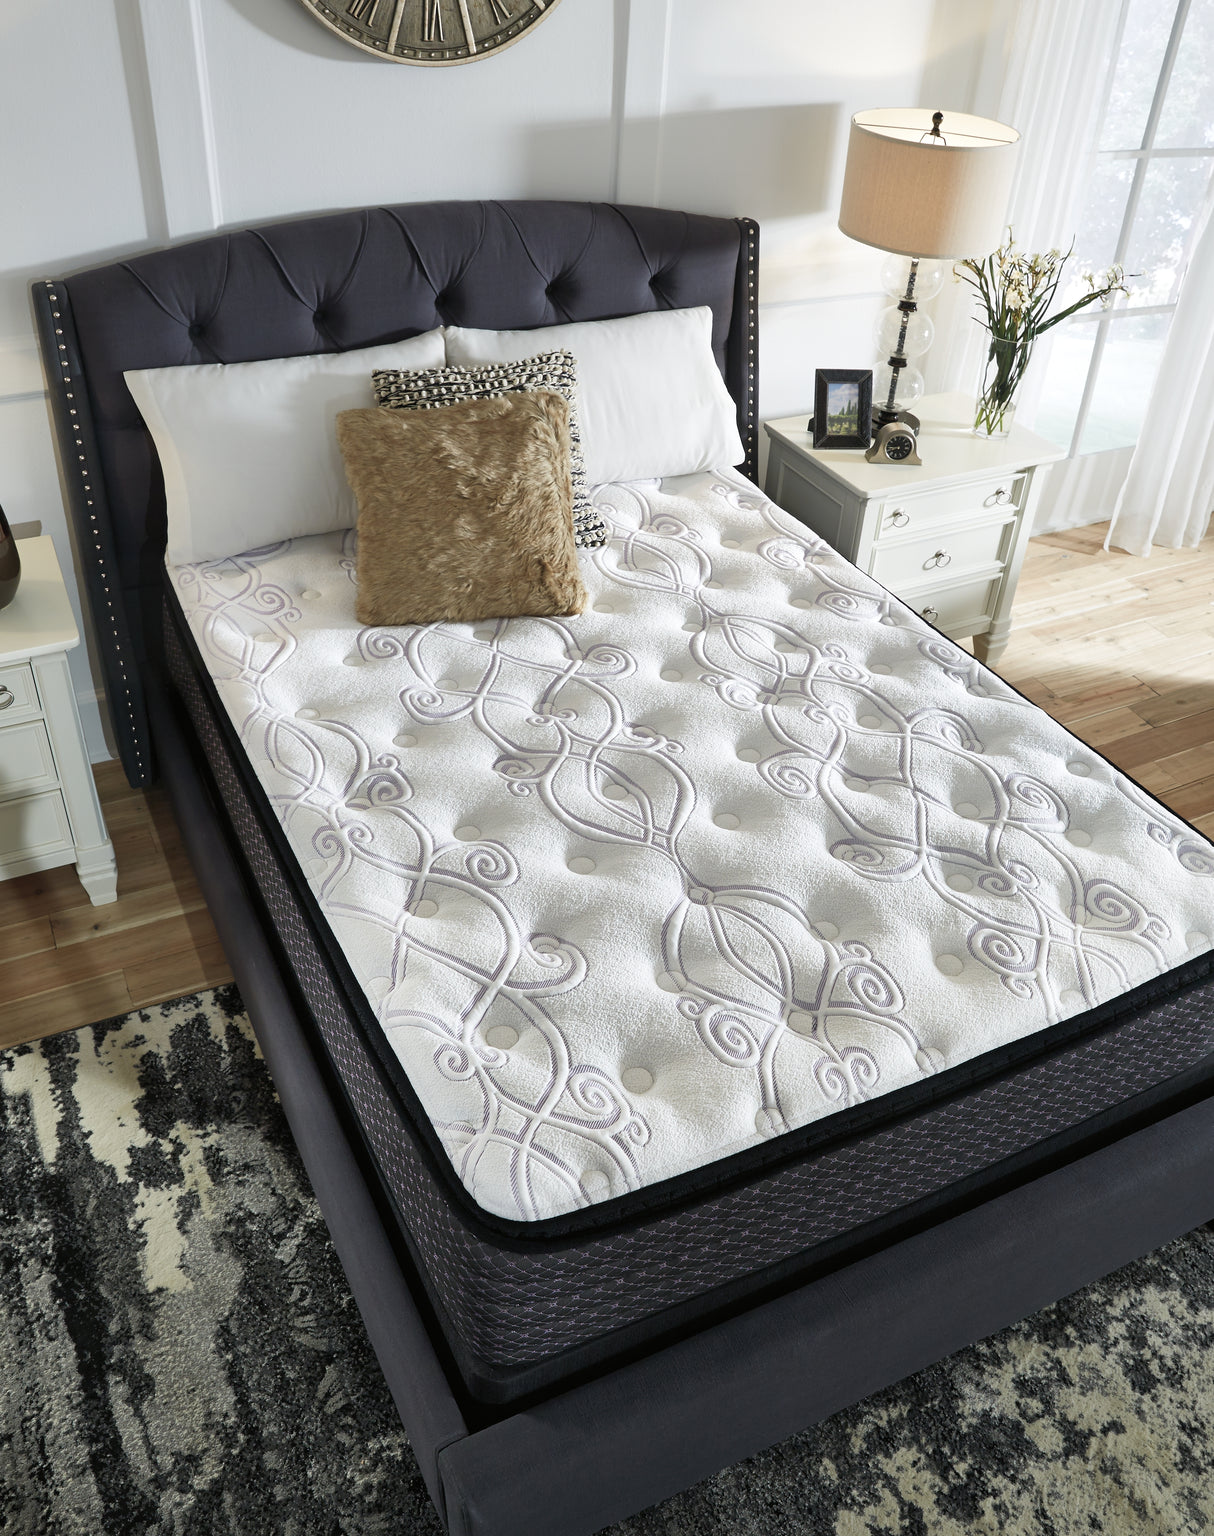 Limited White Edition Pillowtop Full Mattress